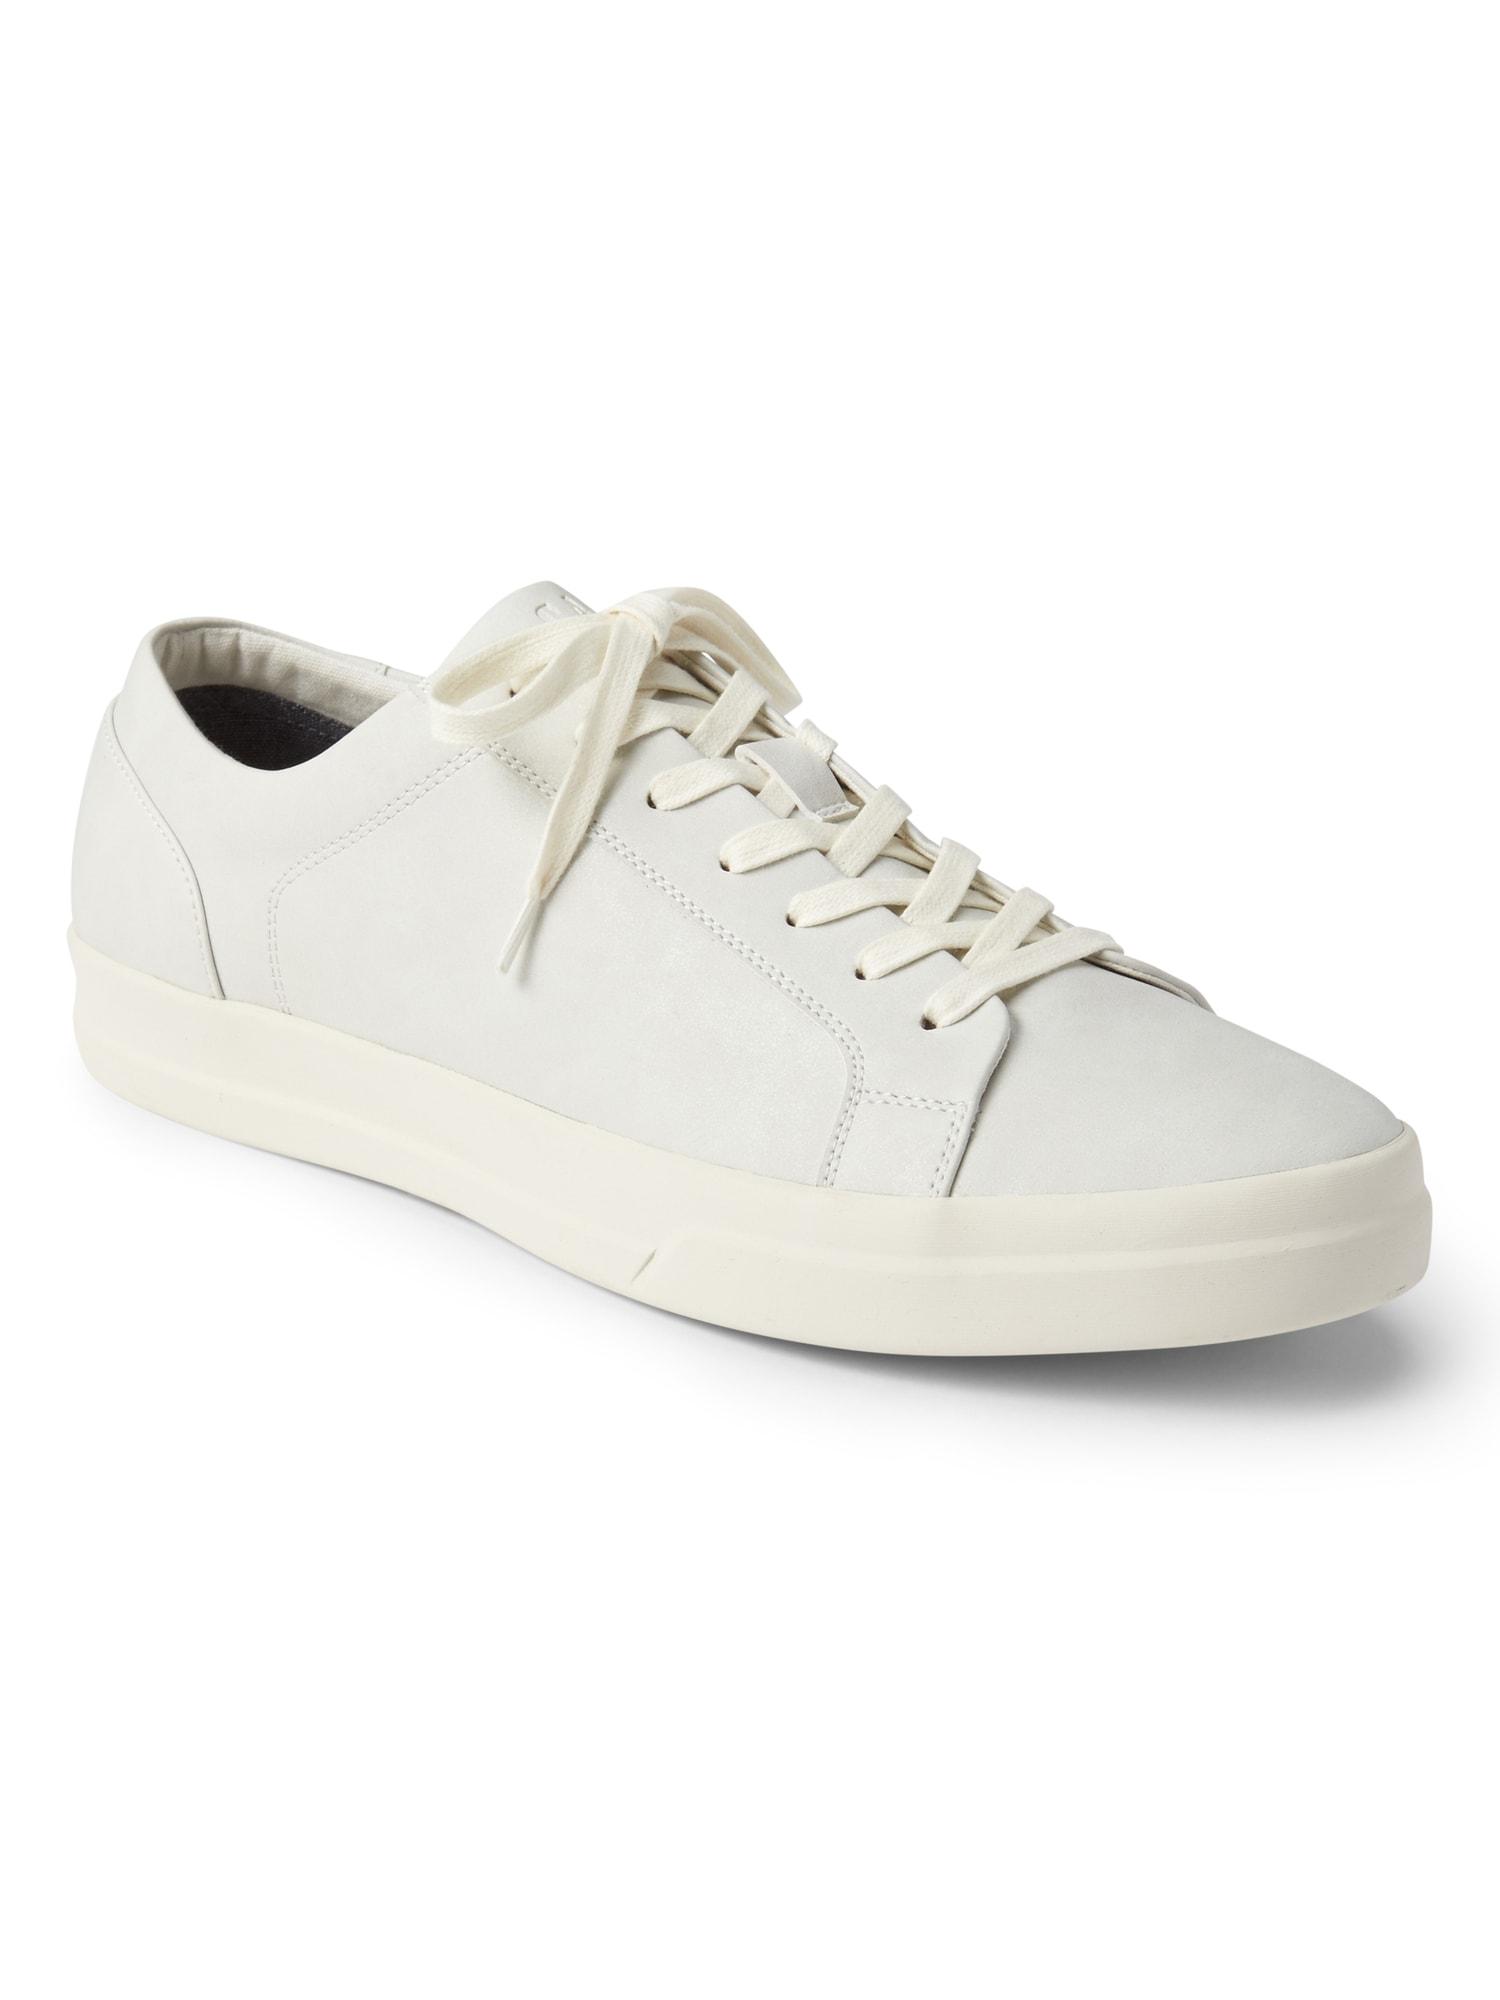 Gap Lace Toe Sneakers in White for Men 